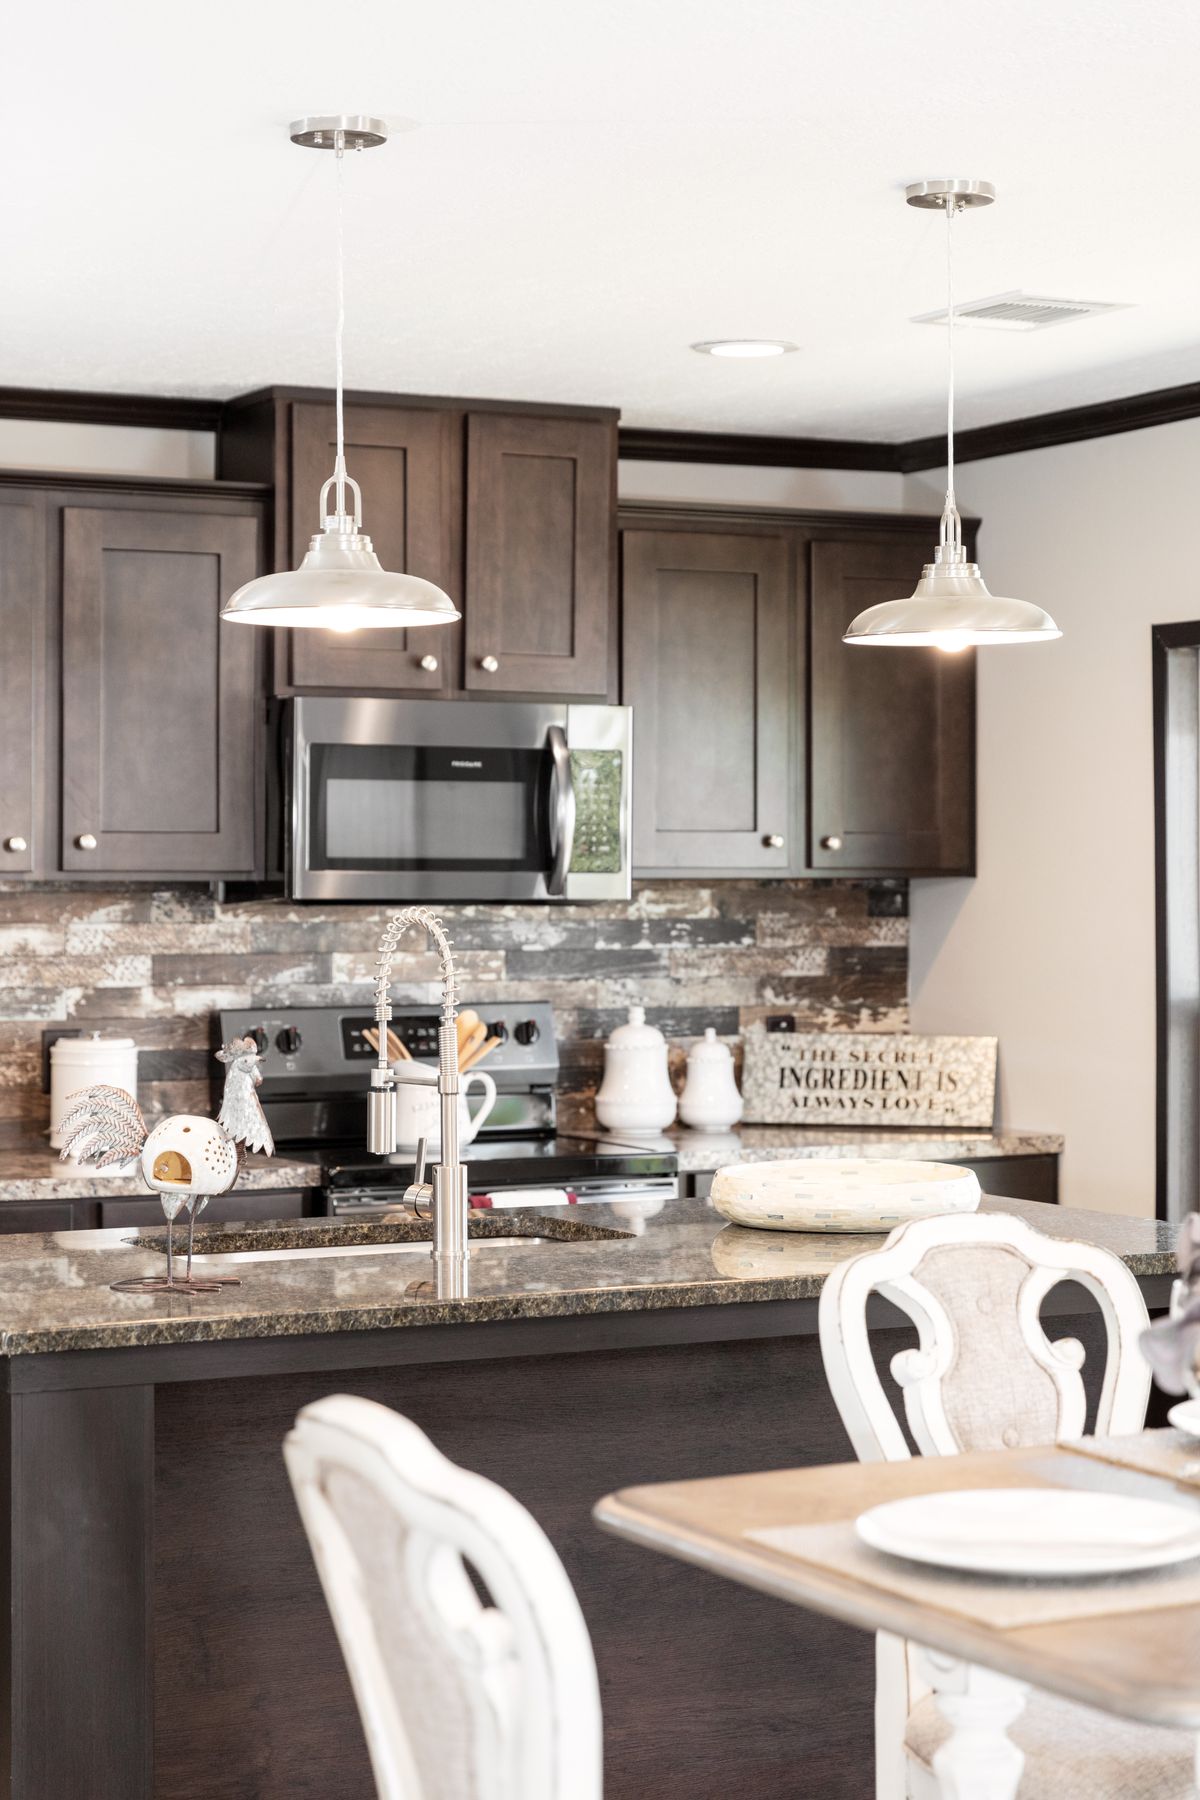 The THE FRANKLIN XL Kitchen. This Manufactured Mobile Home features 4 bedrooms and 2 baths.